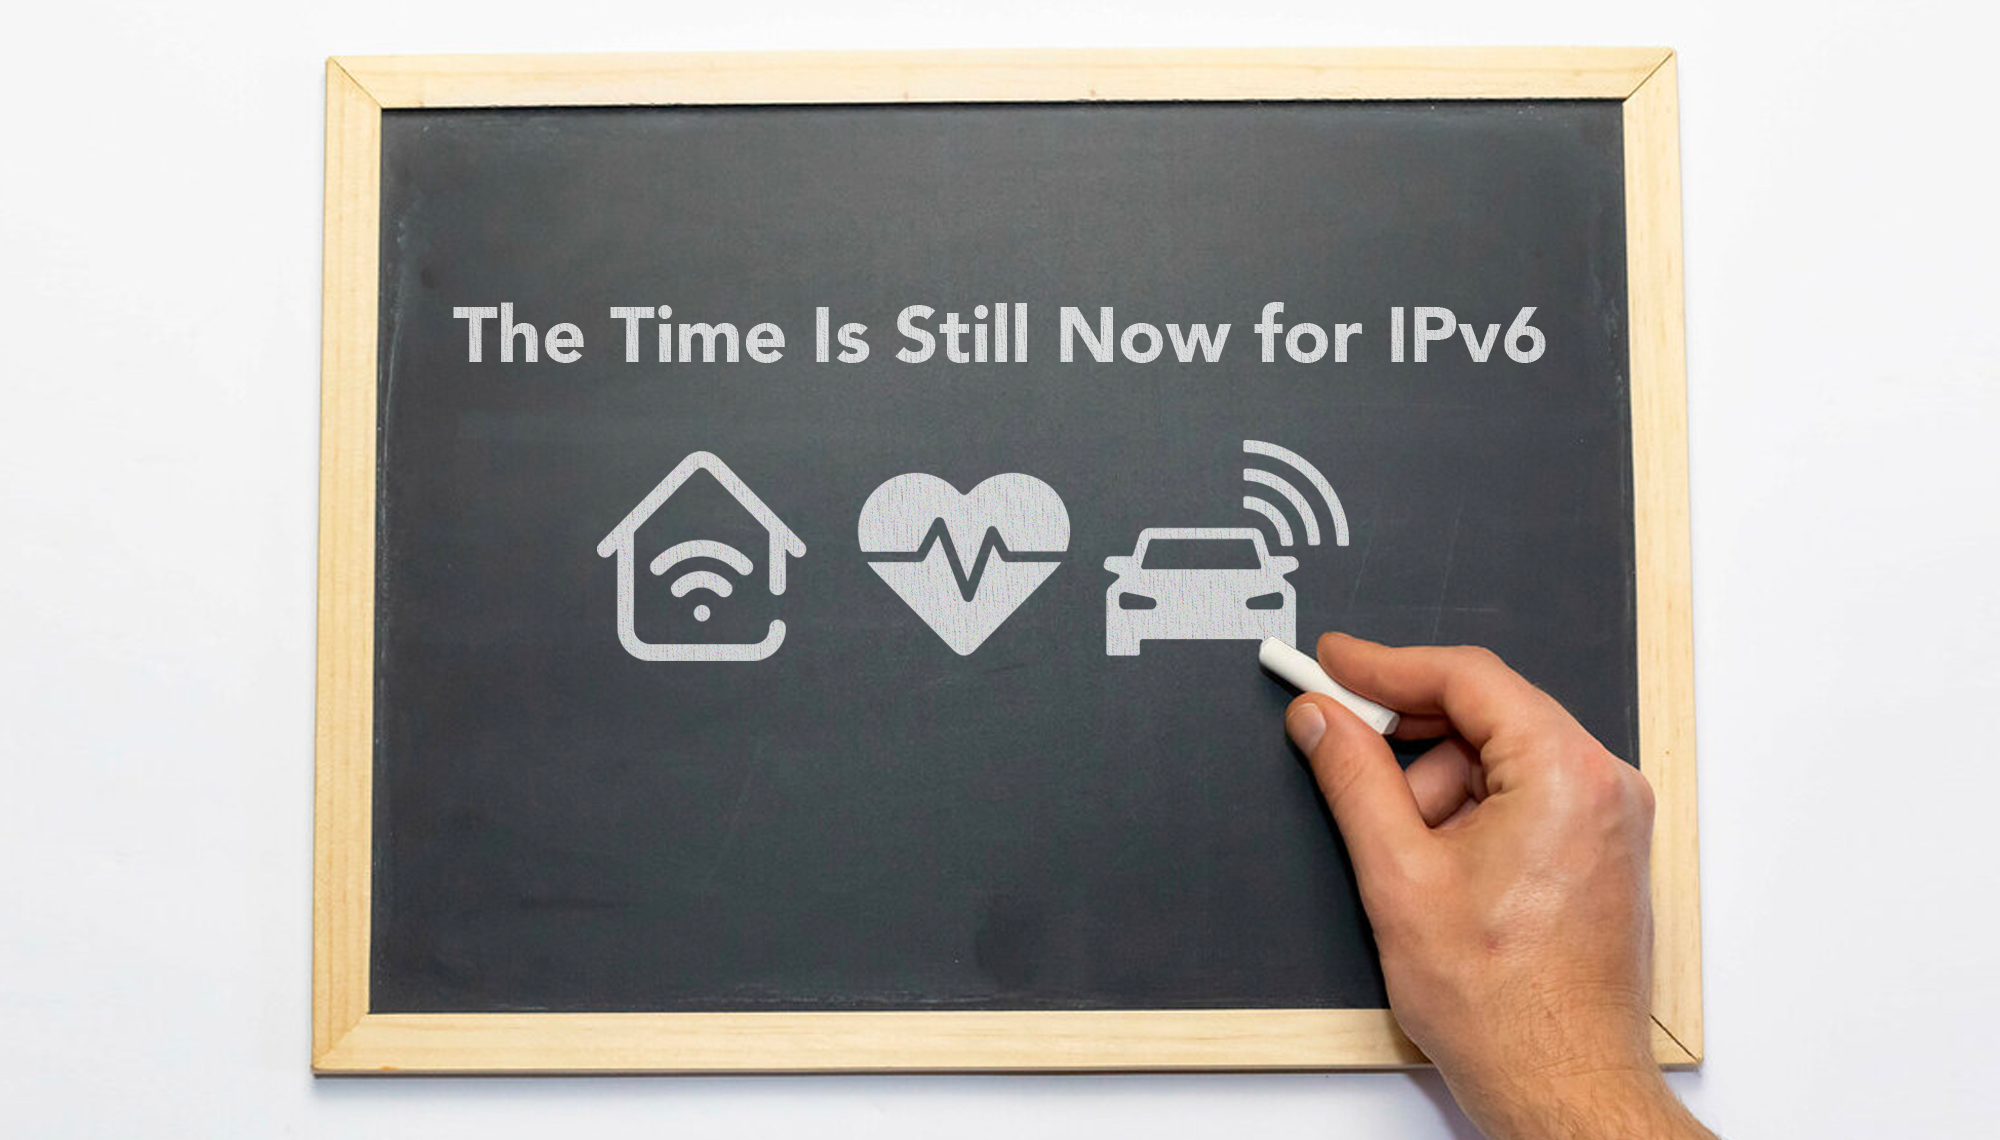 The Time Is Still Now for IPv6